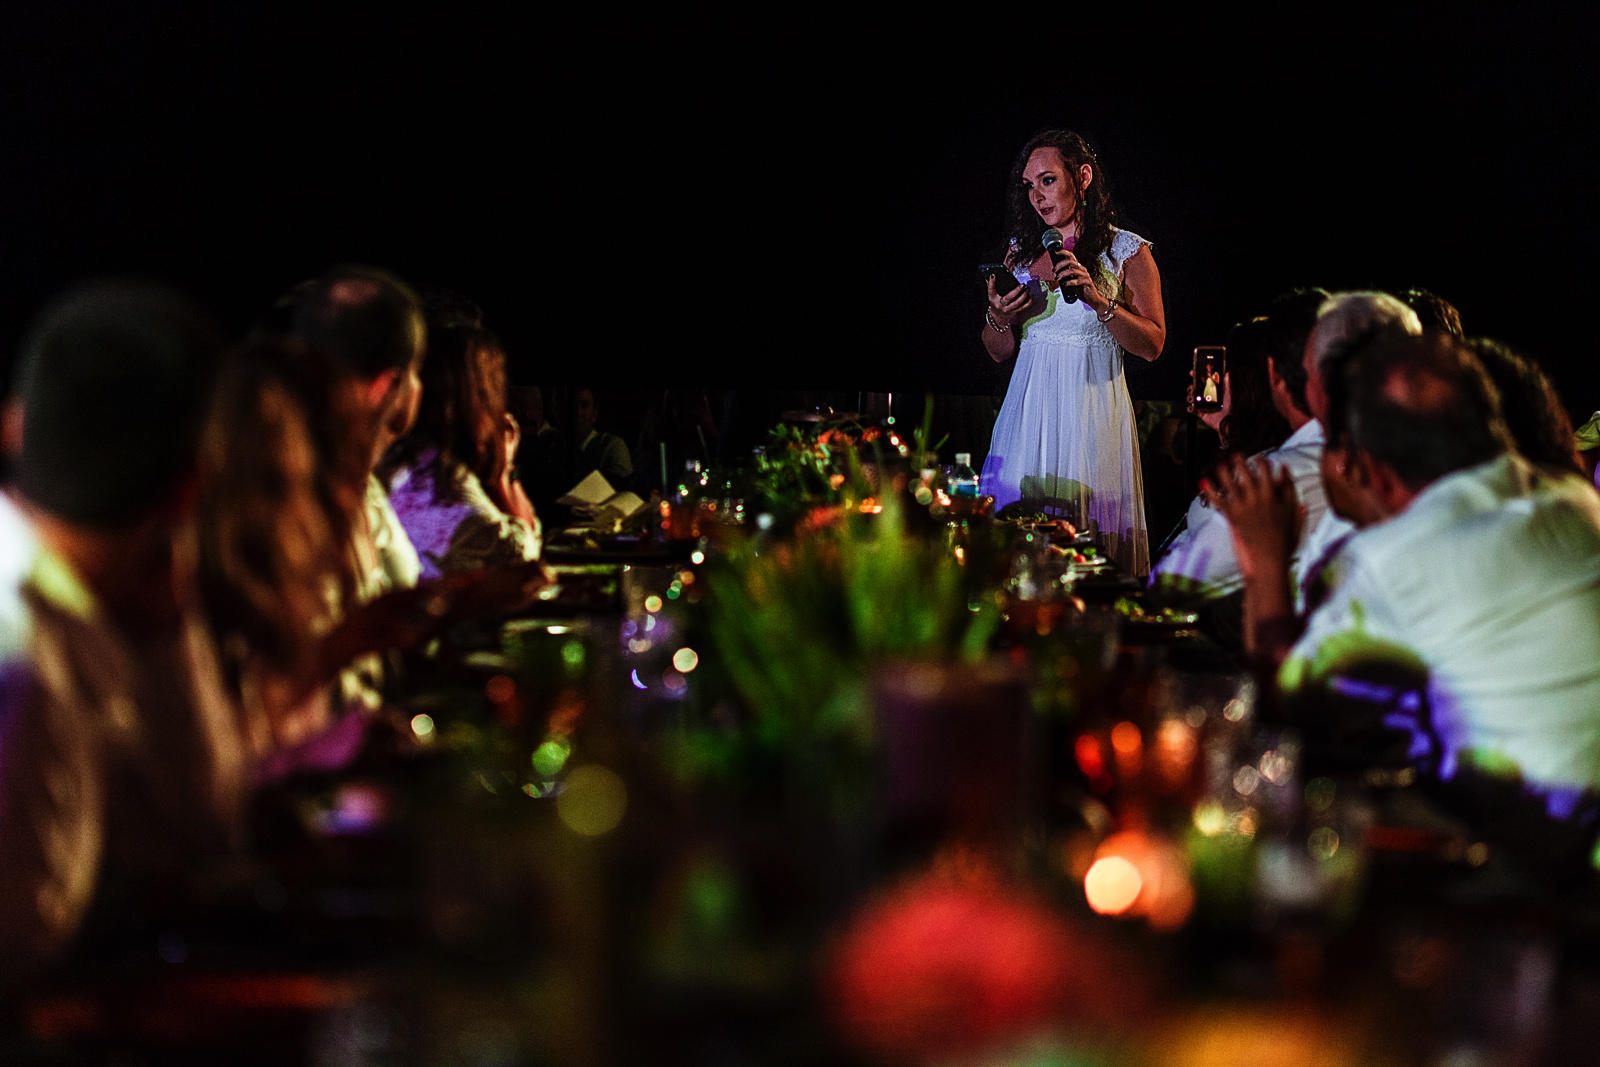 Sister of one of the grooms giving a toast speech during the dinner at Casa Karma